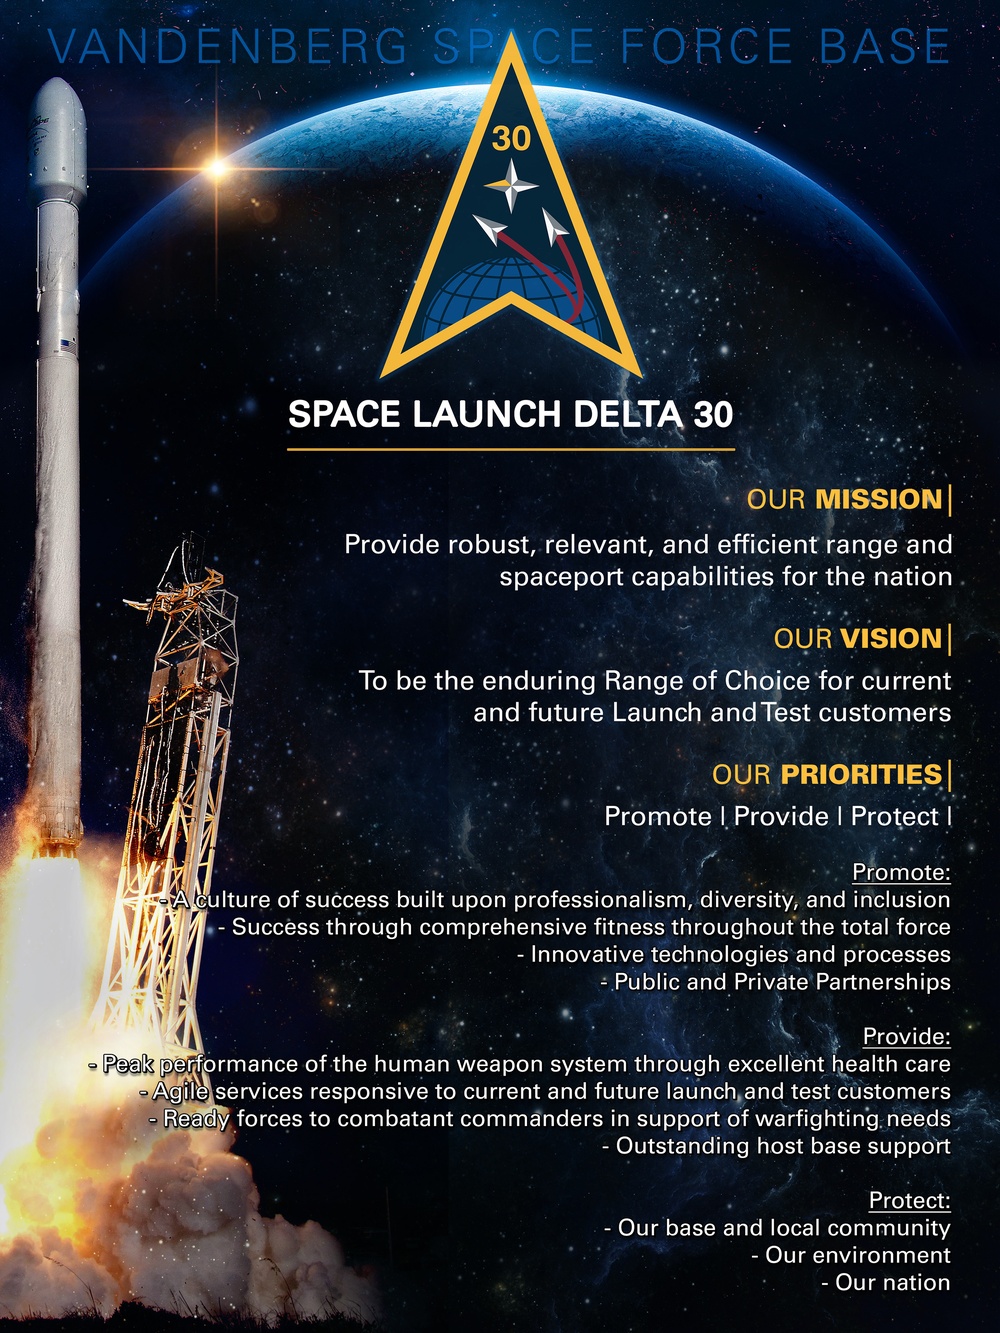 Space Launch Delta 30 Mission/Vision/Priorities